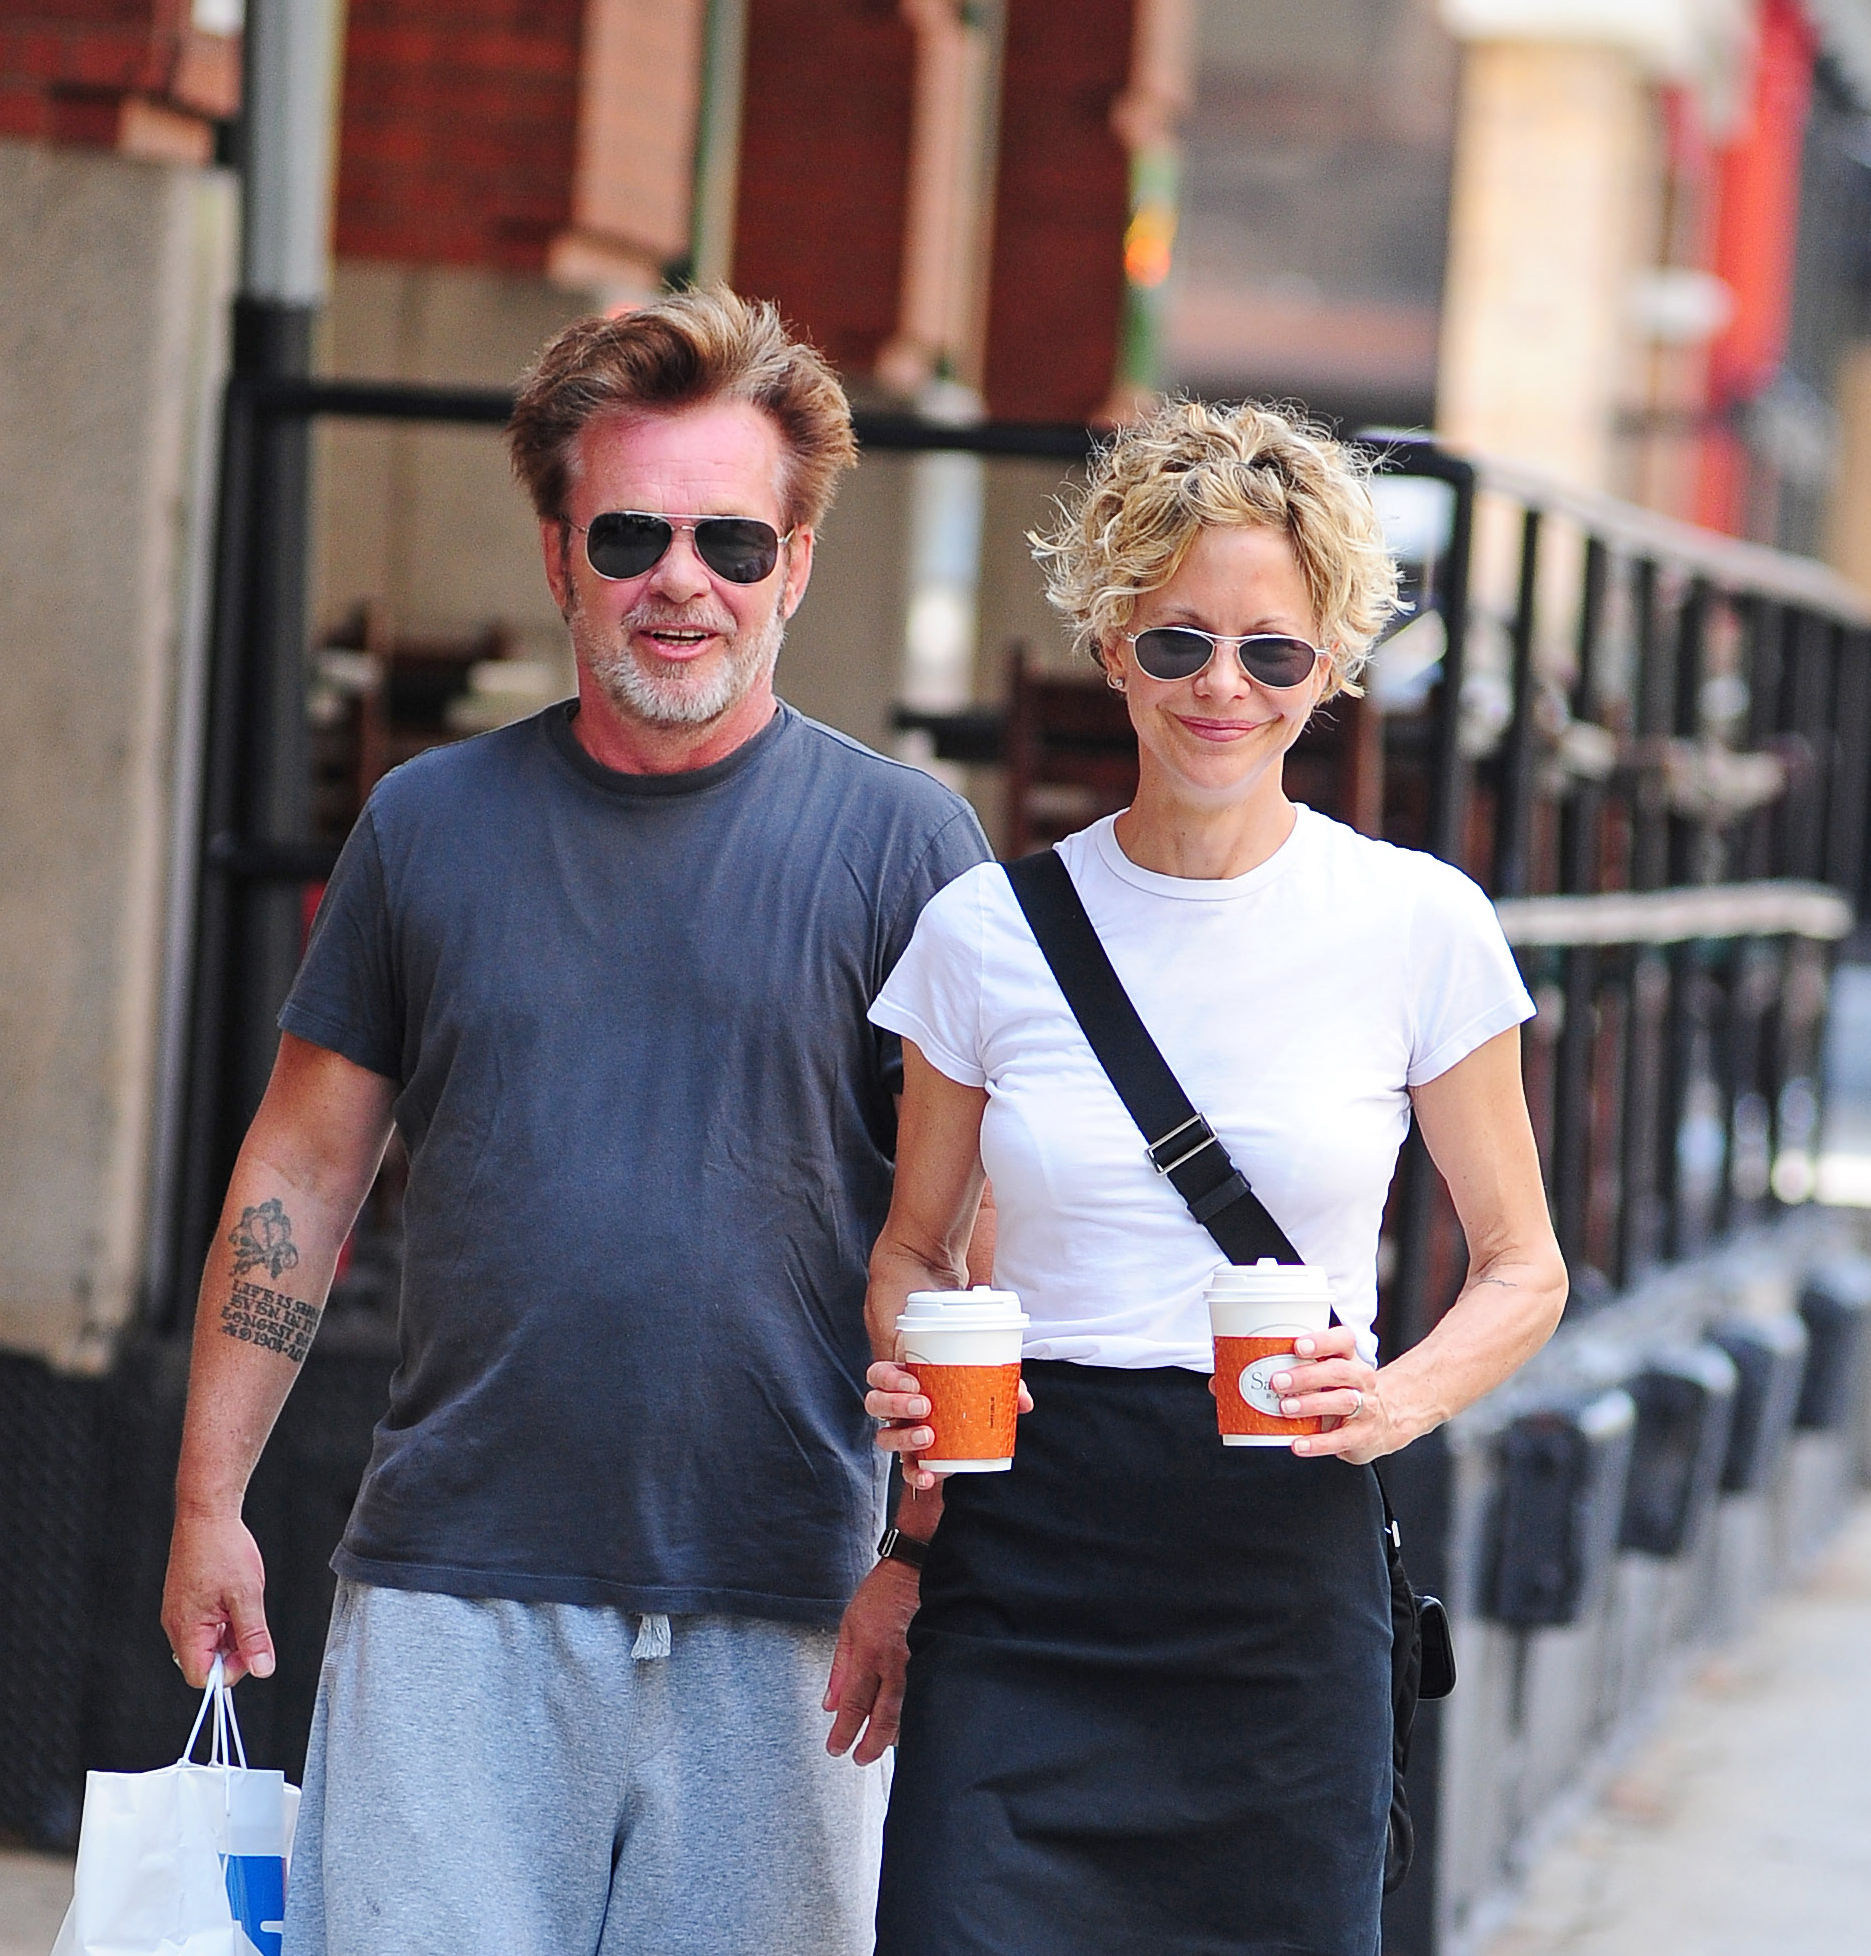 John Cougar Mellencamp and Meg Ryan seen on June 24, 2013, in New York City | Source: Getty Images